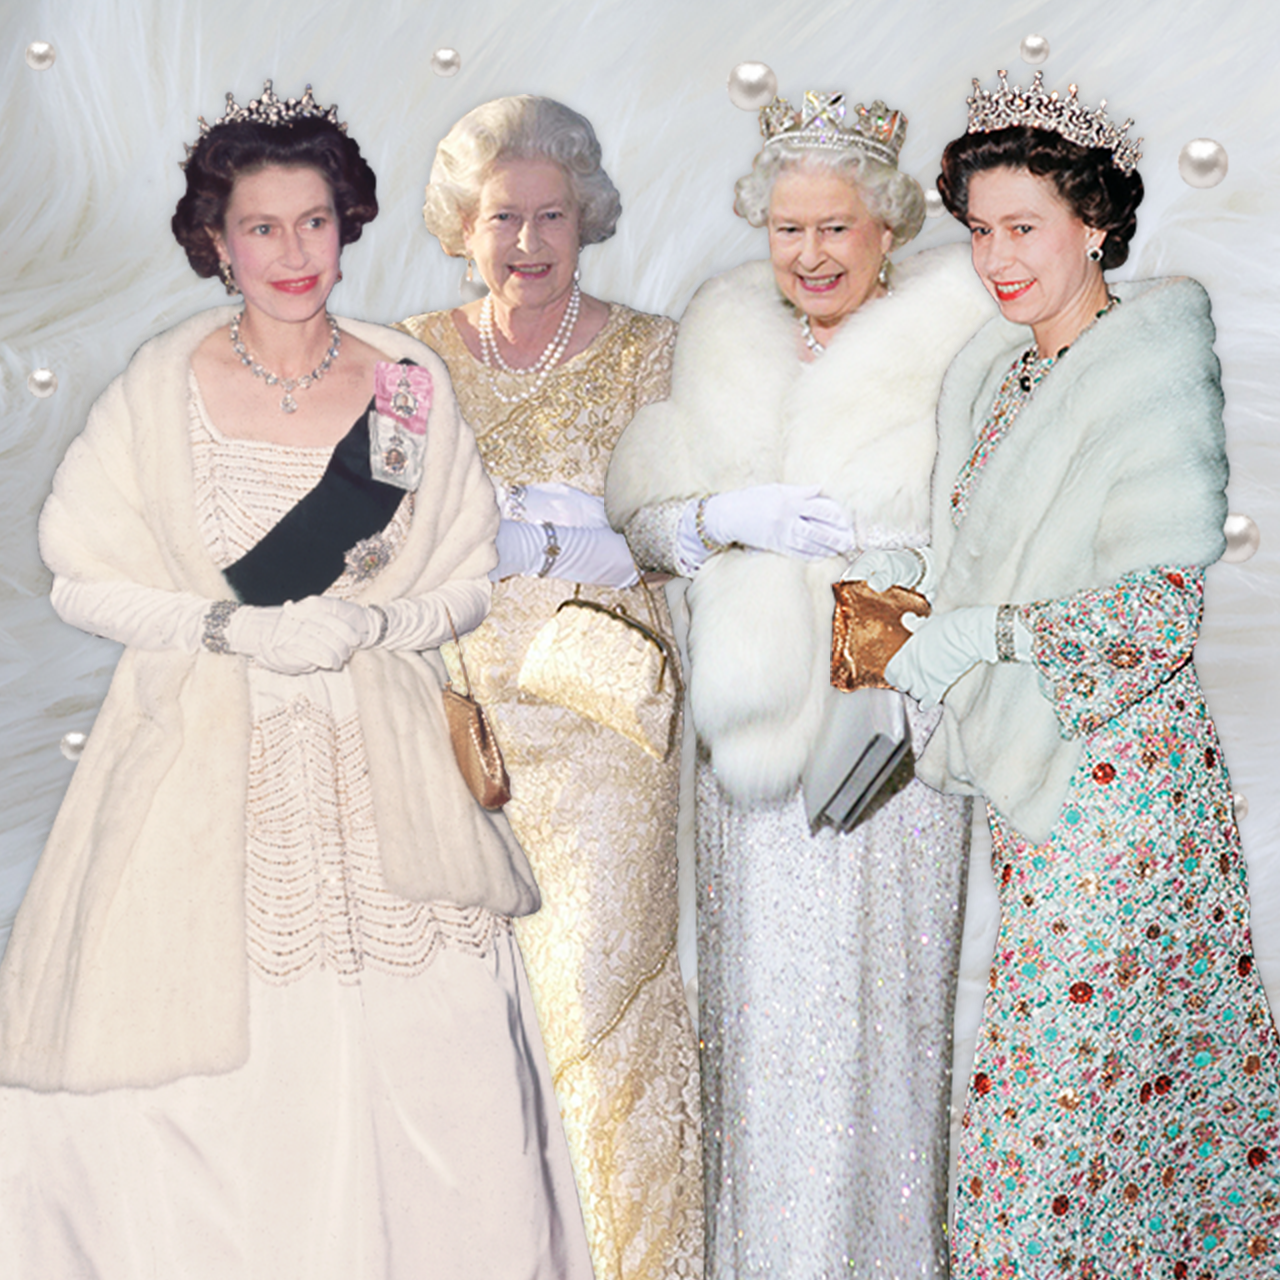 The queen's picks 6 items that made the queen's seven decades of fashion class